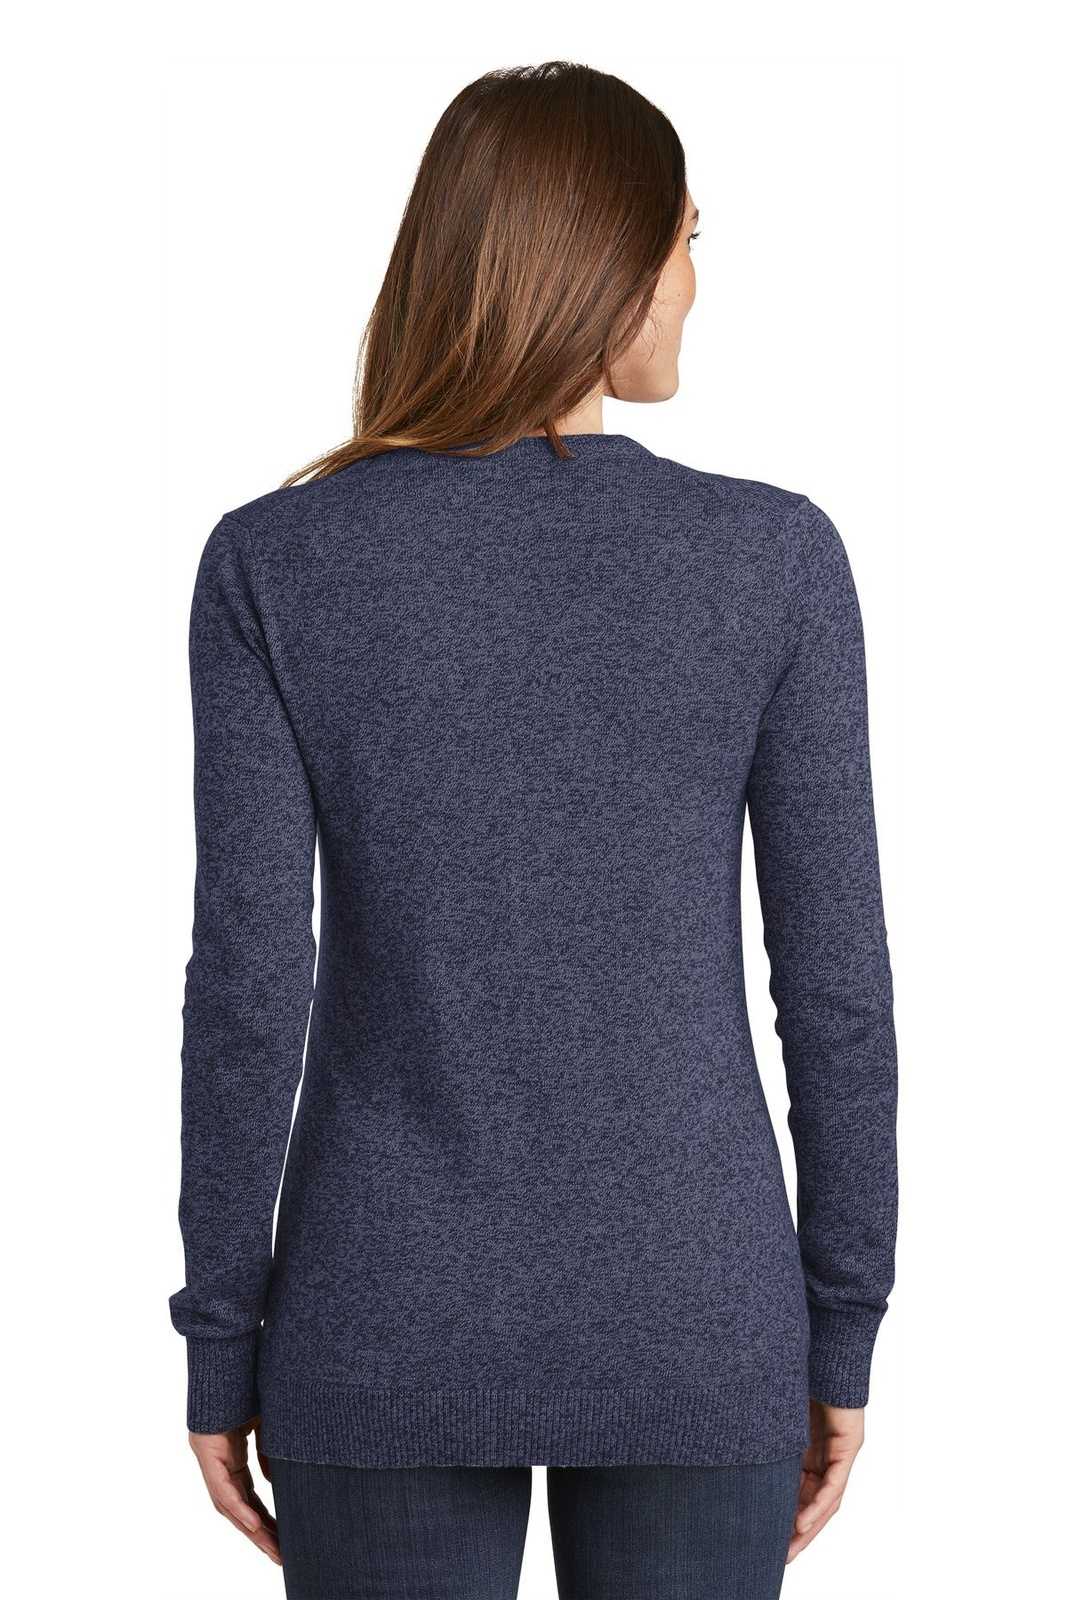 Port Authority LSW415 Ladies Marled Cardigan Sweater - Navy Marl - HIT a Double - 2